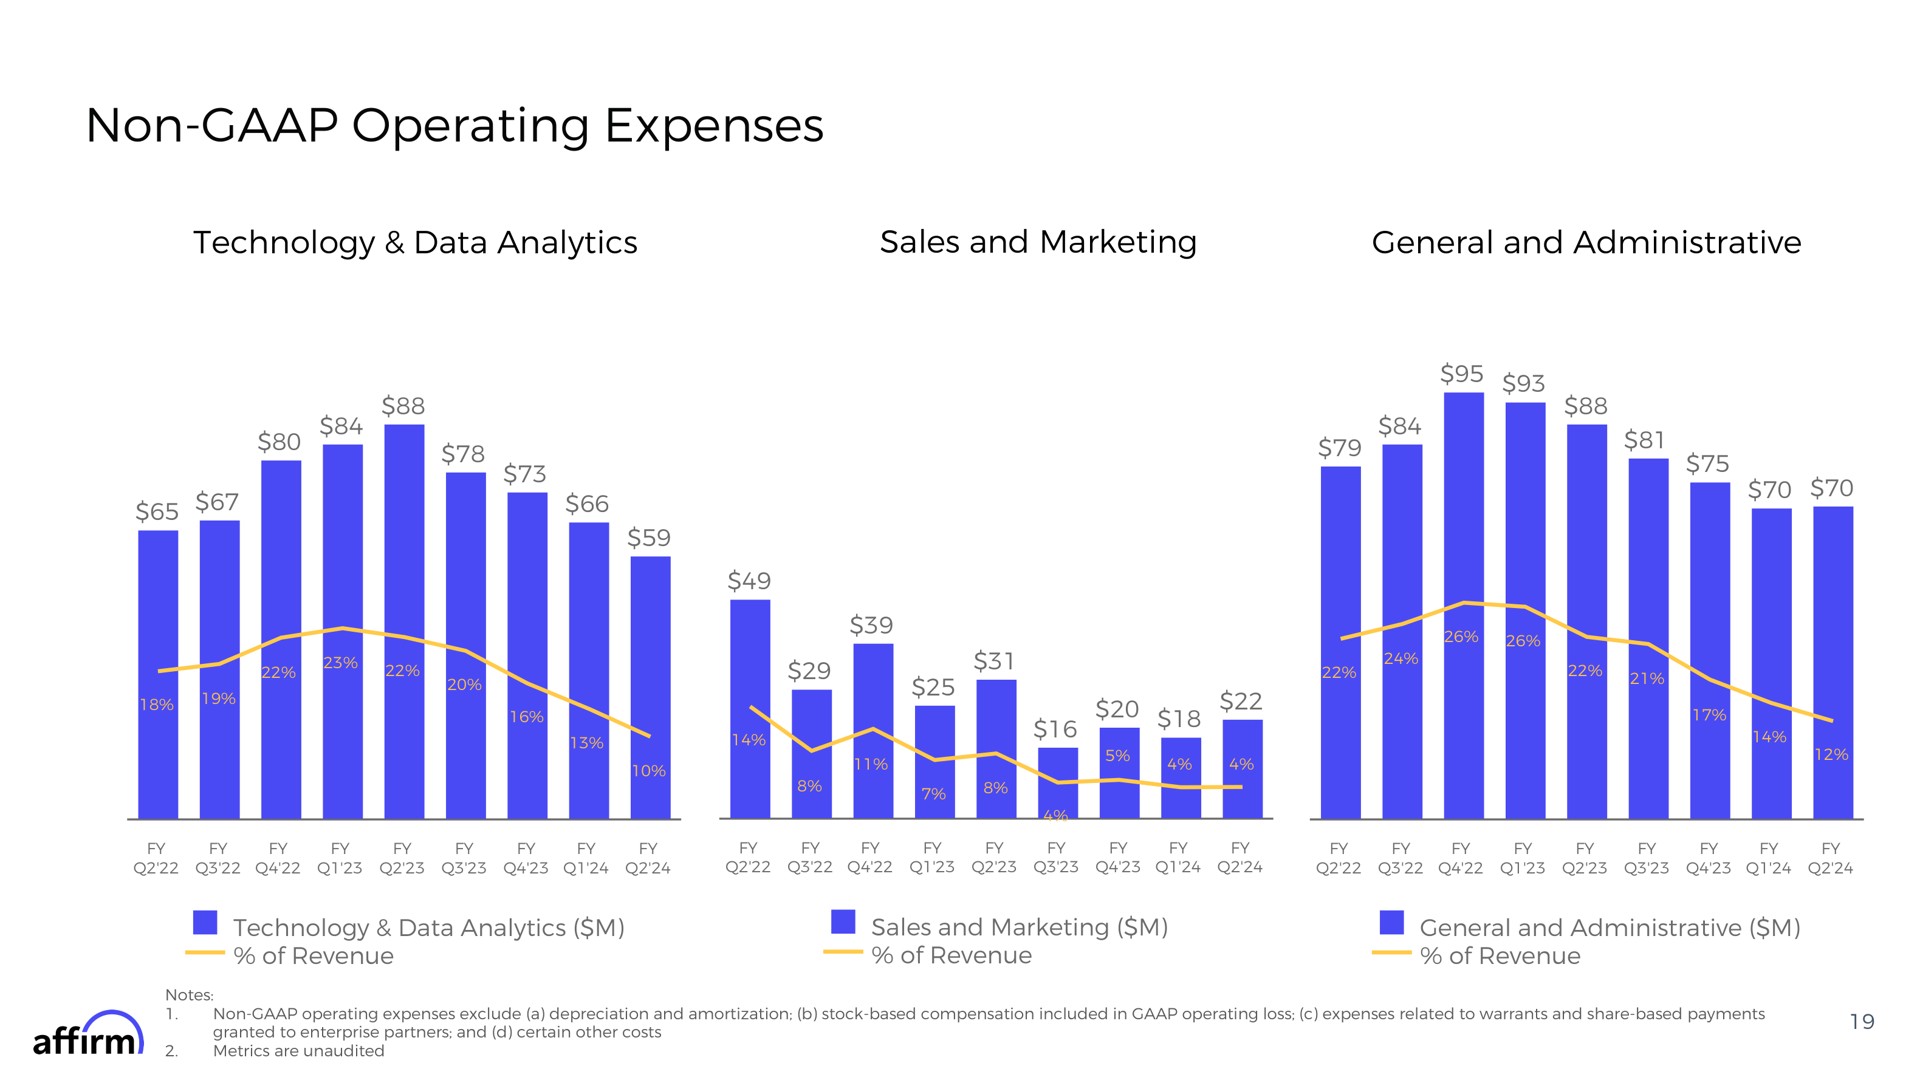 non operating expenses technology data analytics sales and marketing general and administrative | Affirm